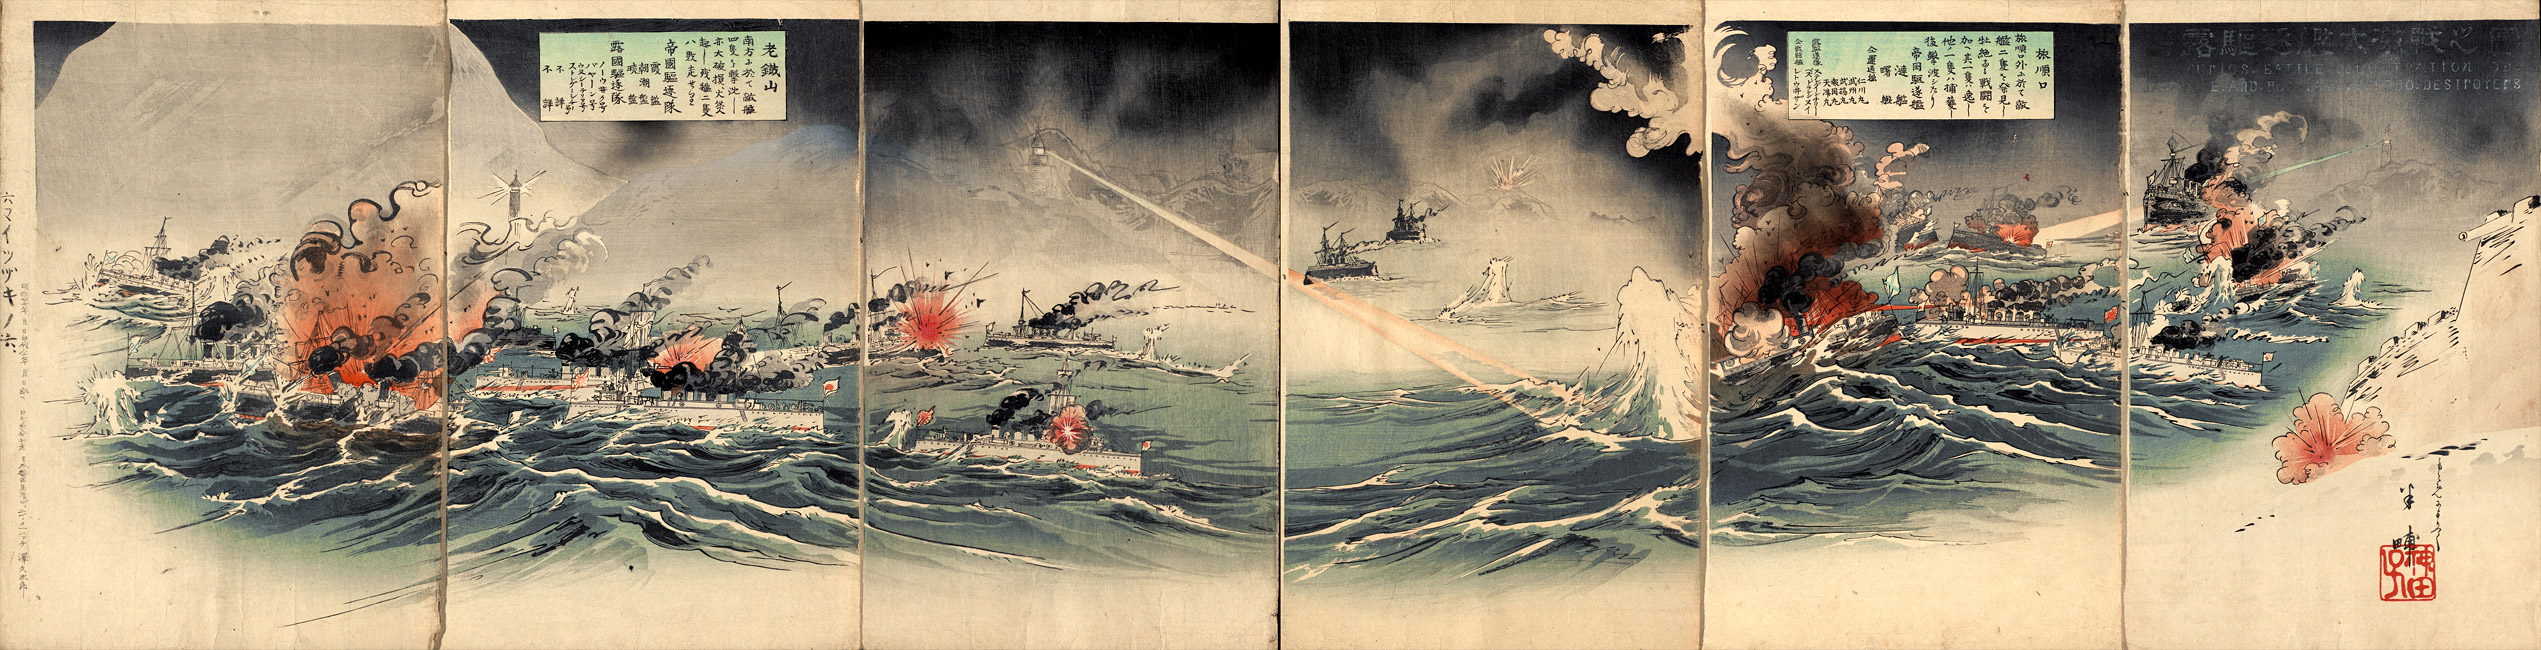 “Illustration of the Furious Battle of Japanese and Russian Torpedo Destroyers outside the Harbor of Port Arthur” by Yasuda Hampō, 1904 [2000.072] Sharf Collection, Museum of Fine Arts, Boston